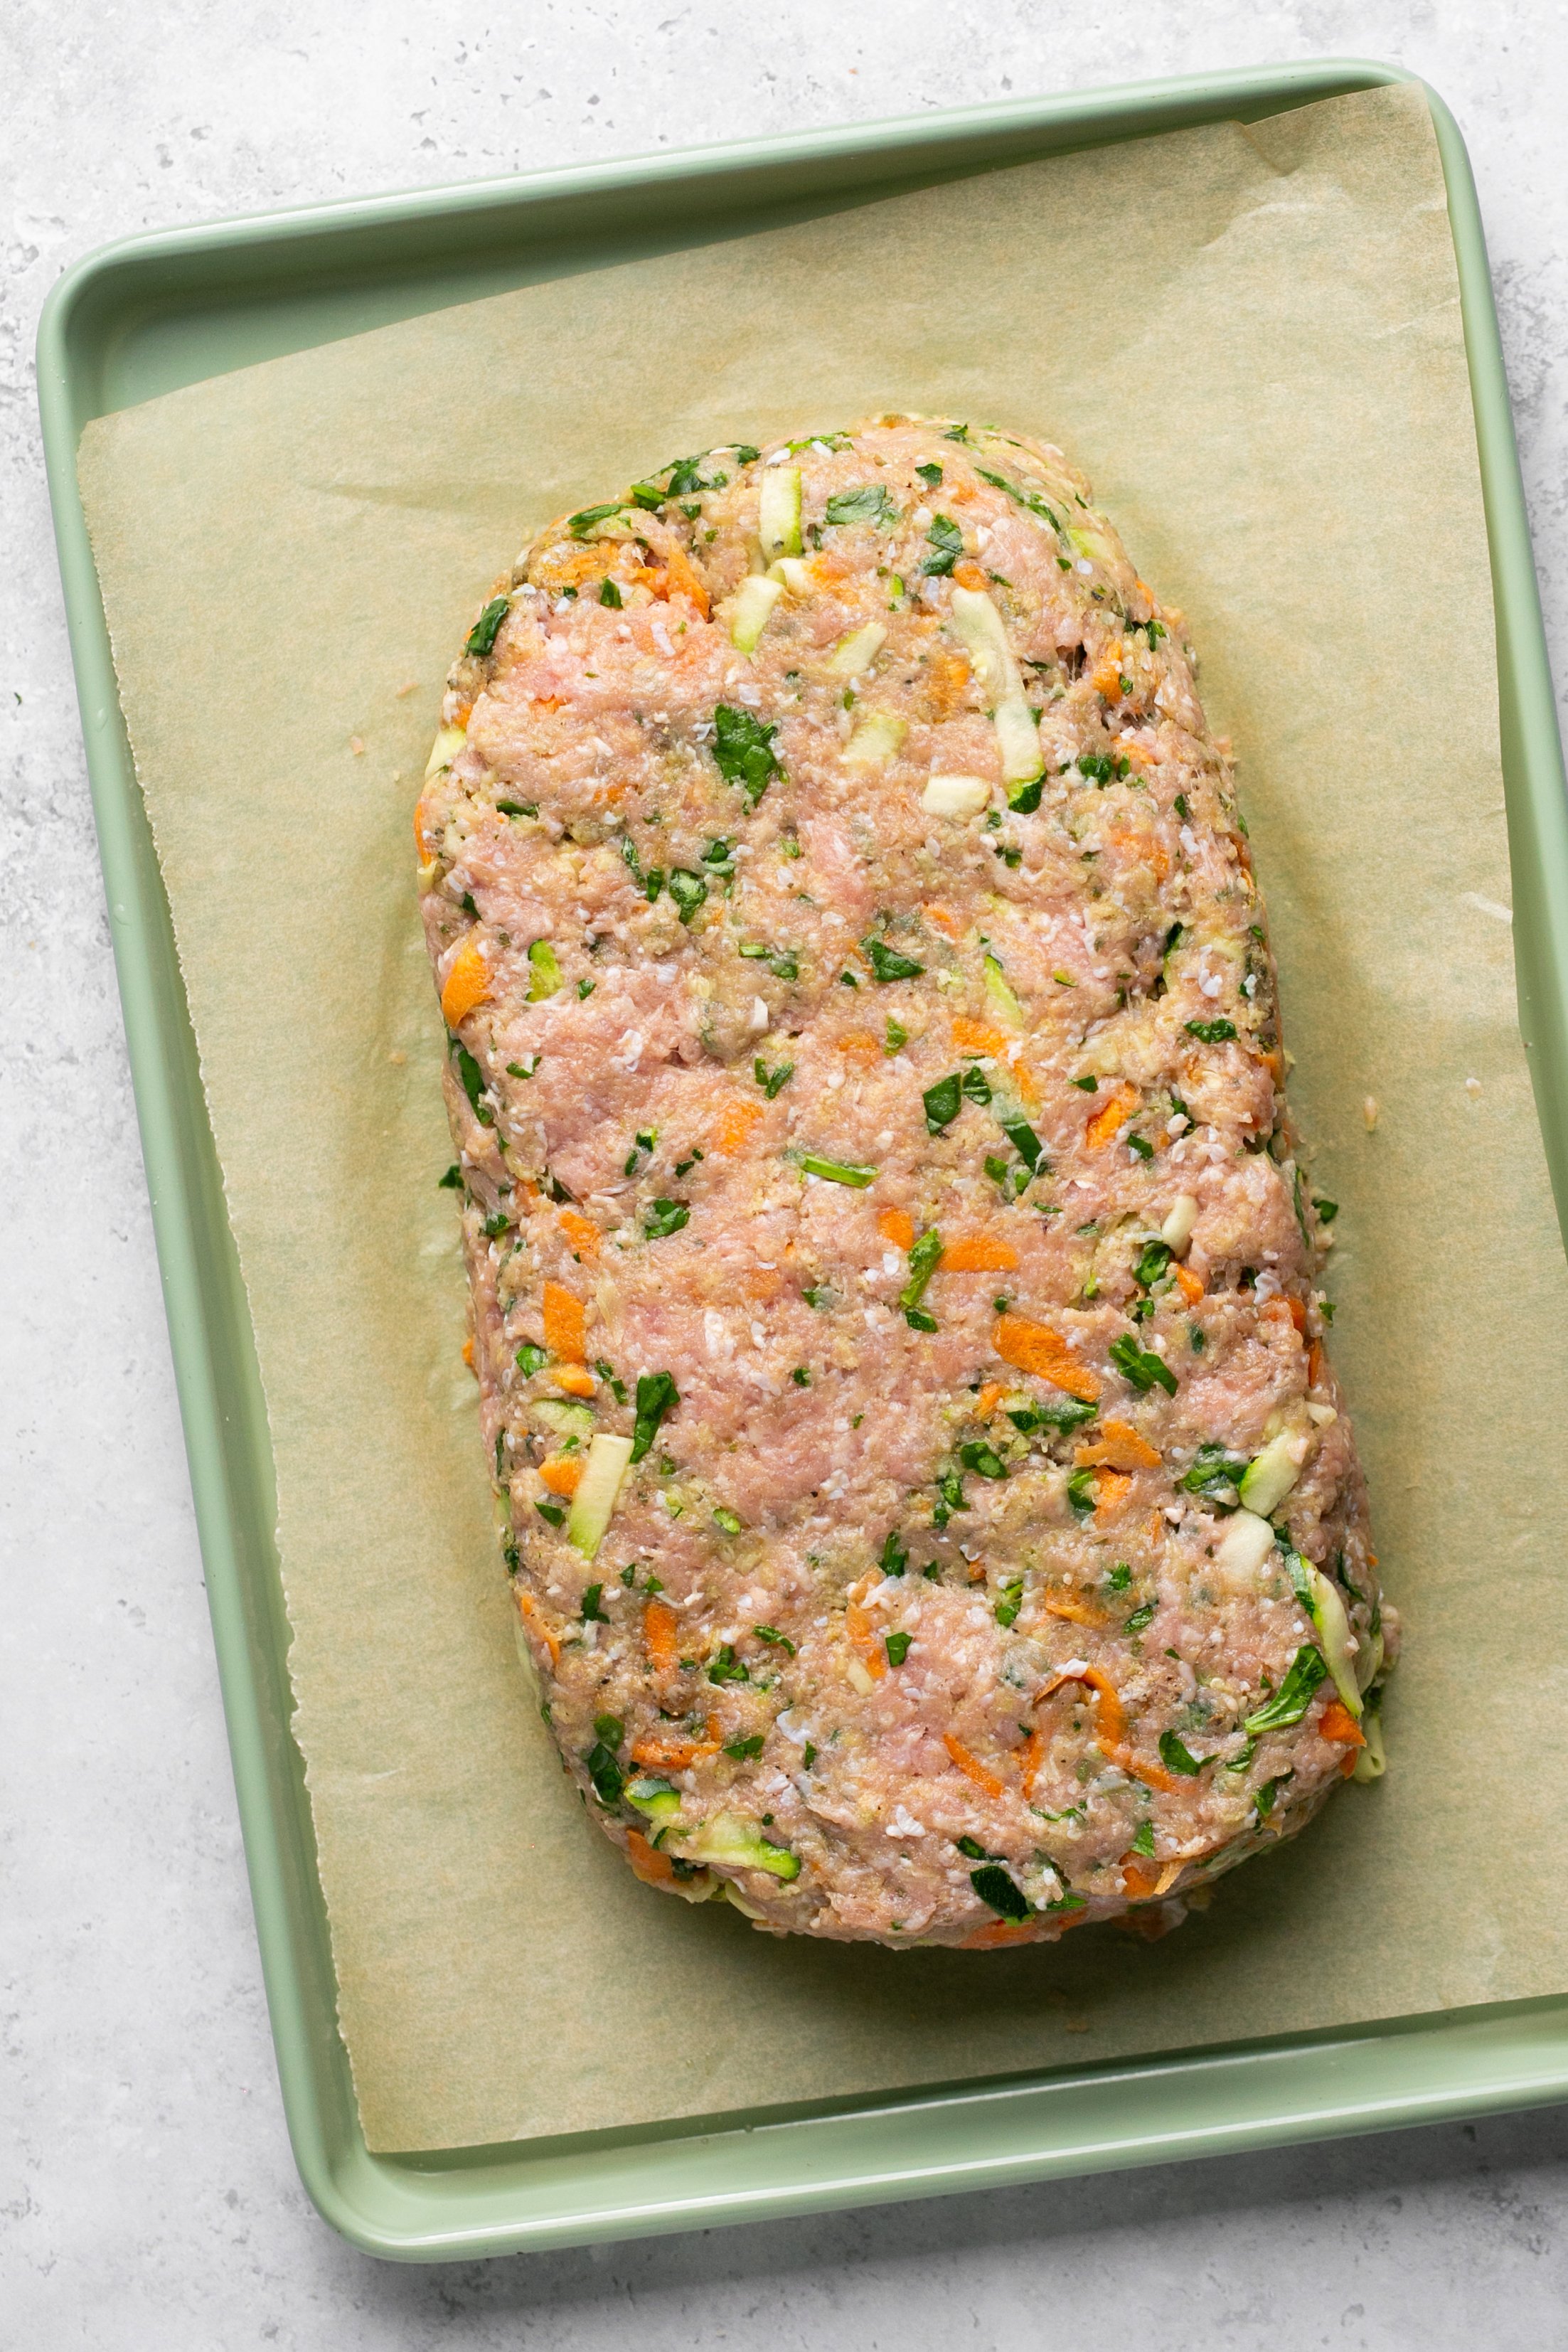 Raw turkey meatloaf mixture shaped into a rectangular loaf sitting on a parchment lined baking sheet on a white counter.